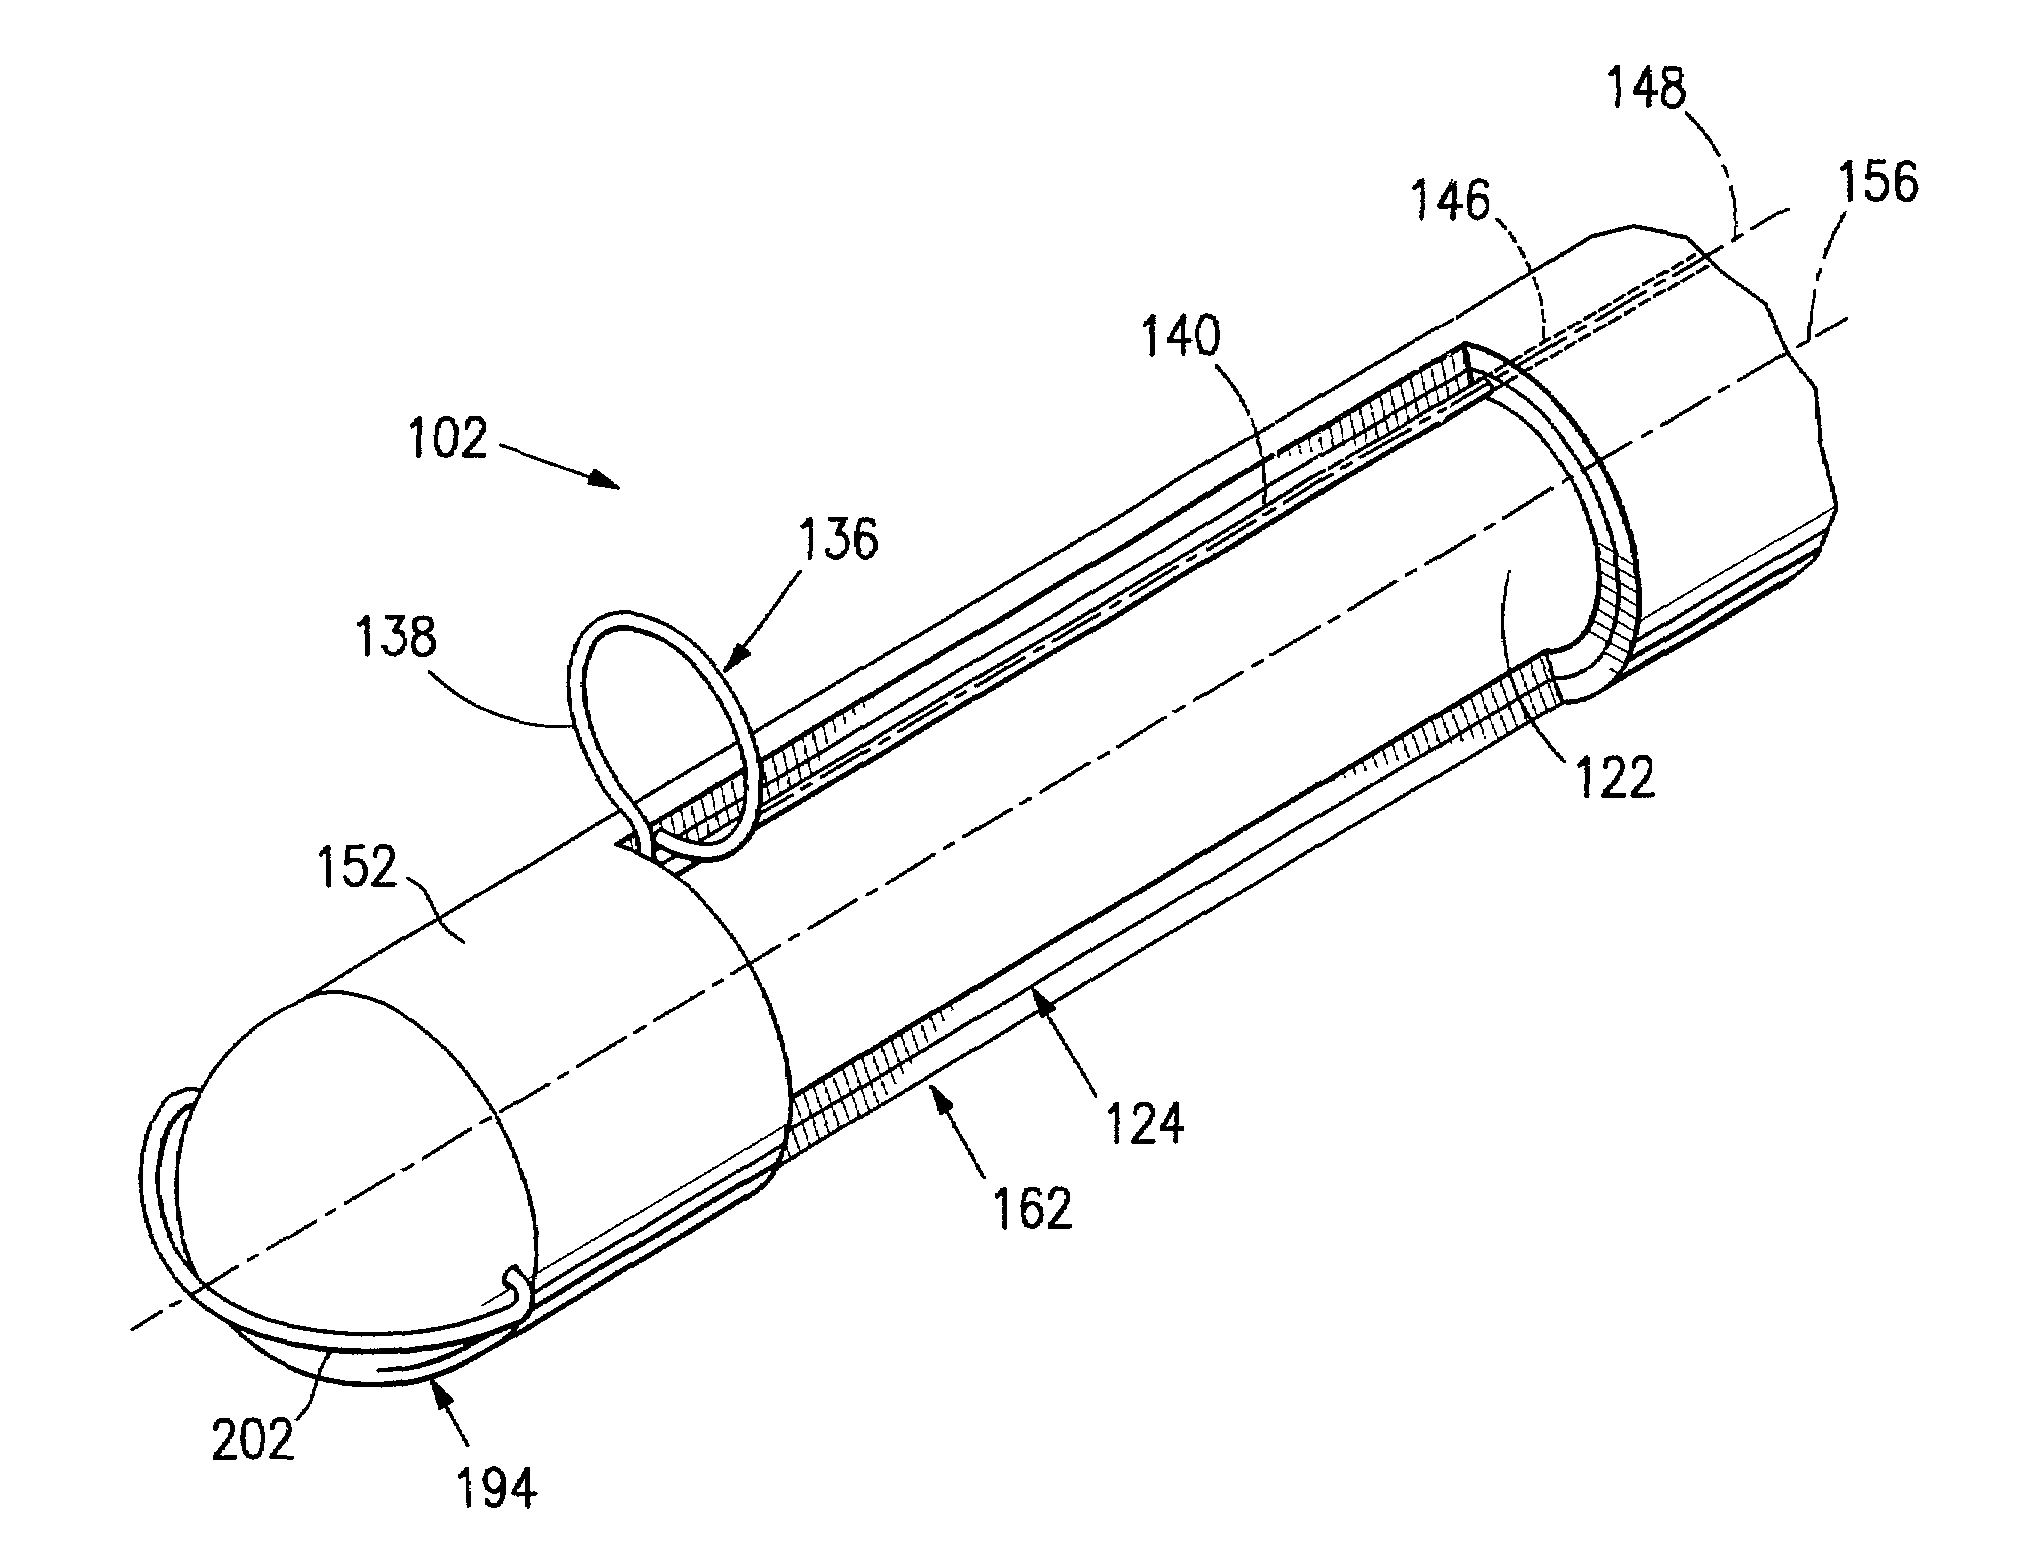 Tissue acquisition system and method of use